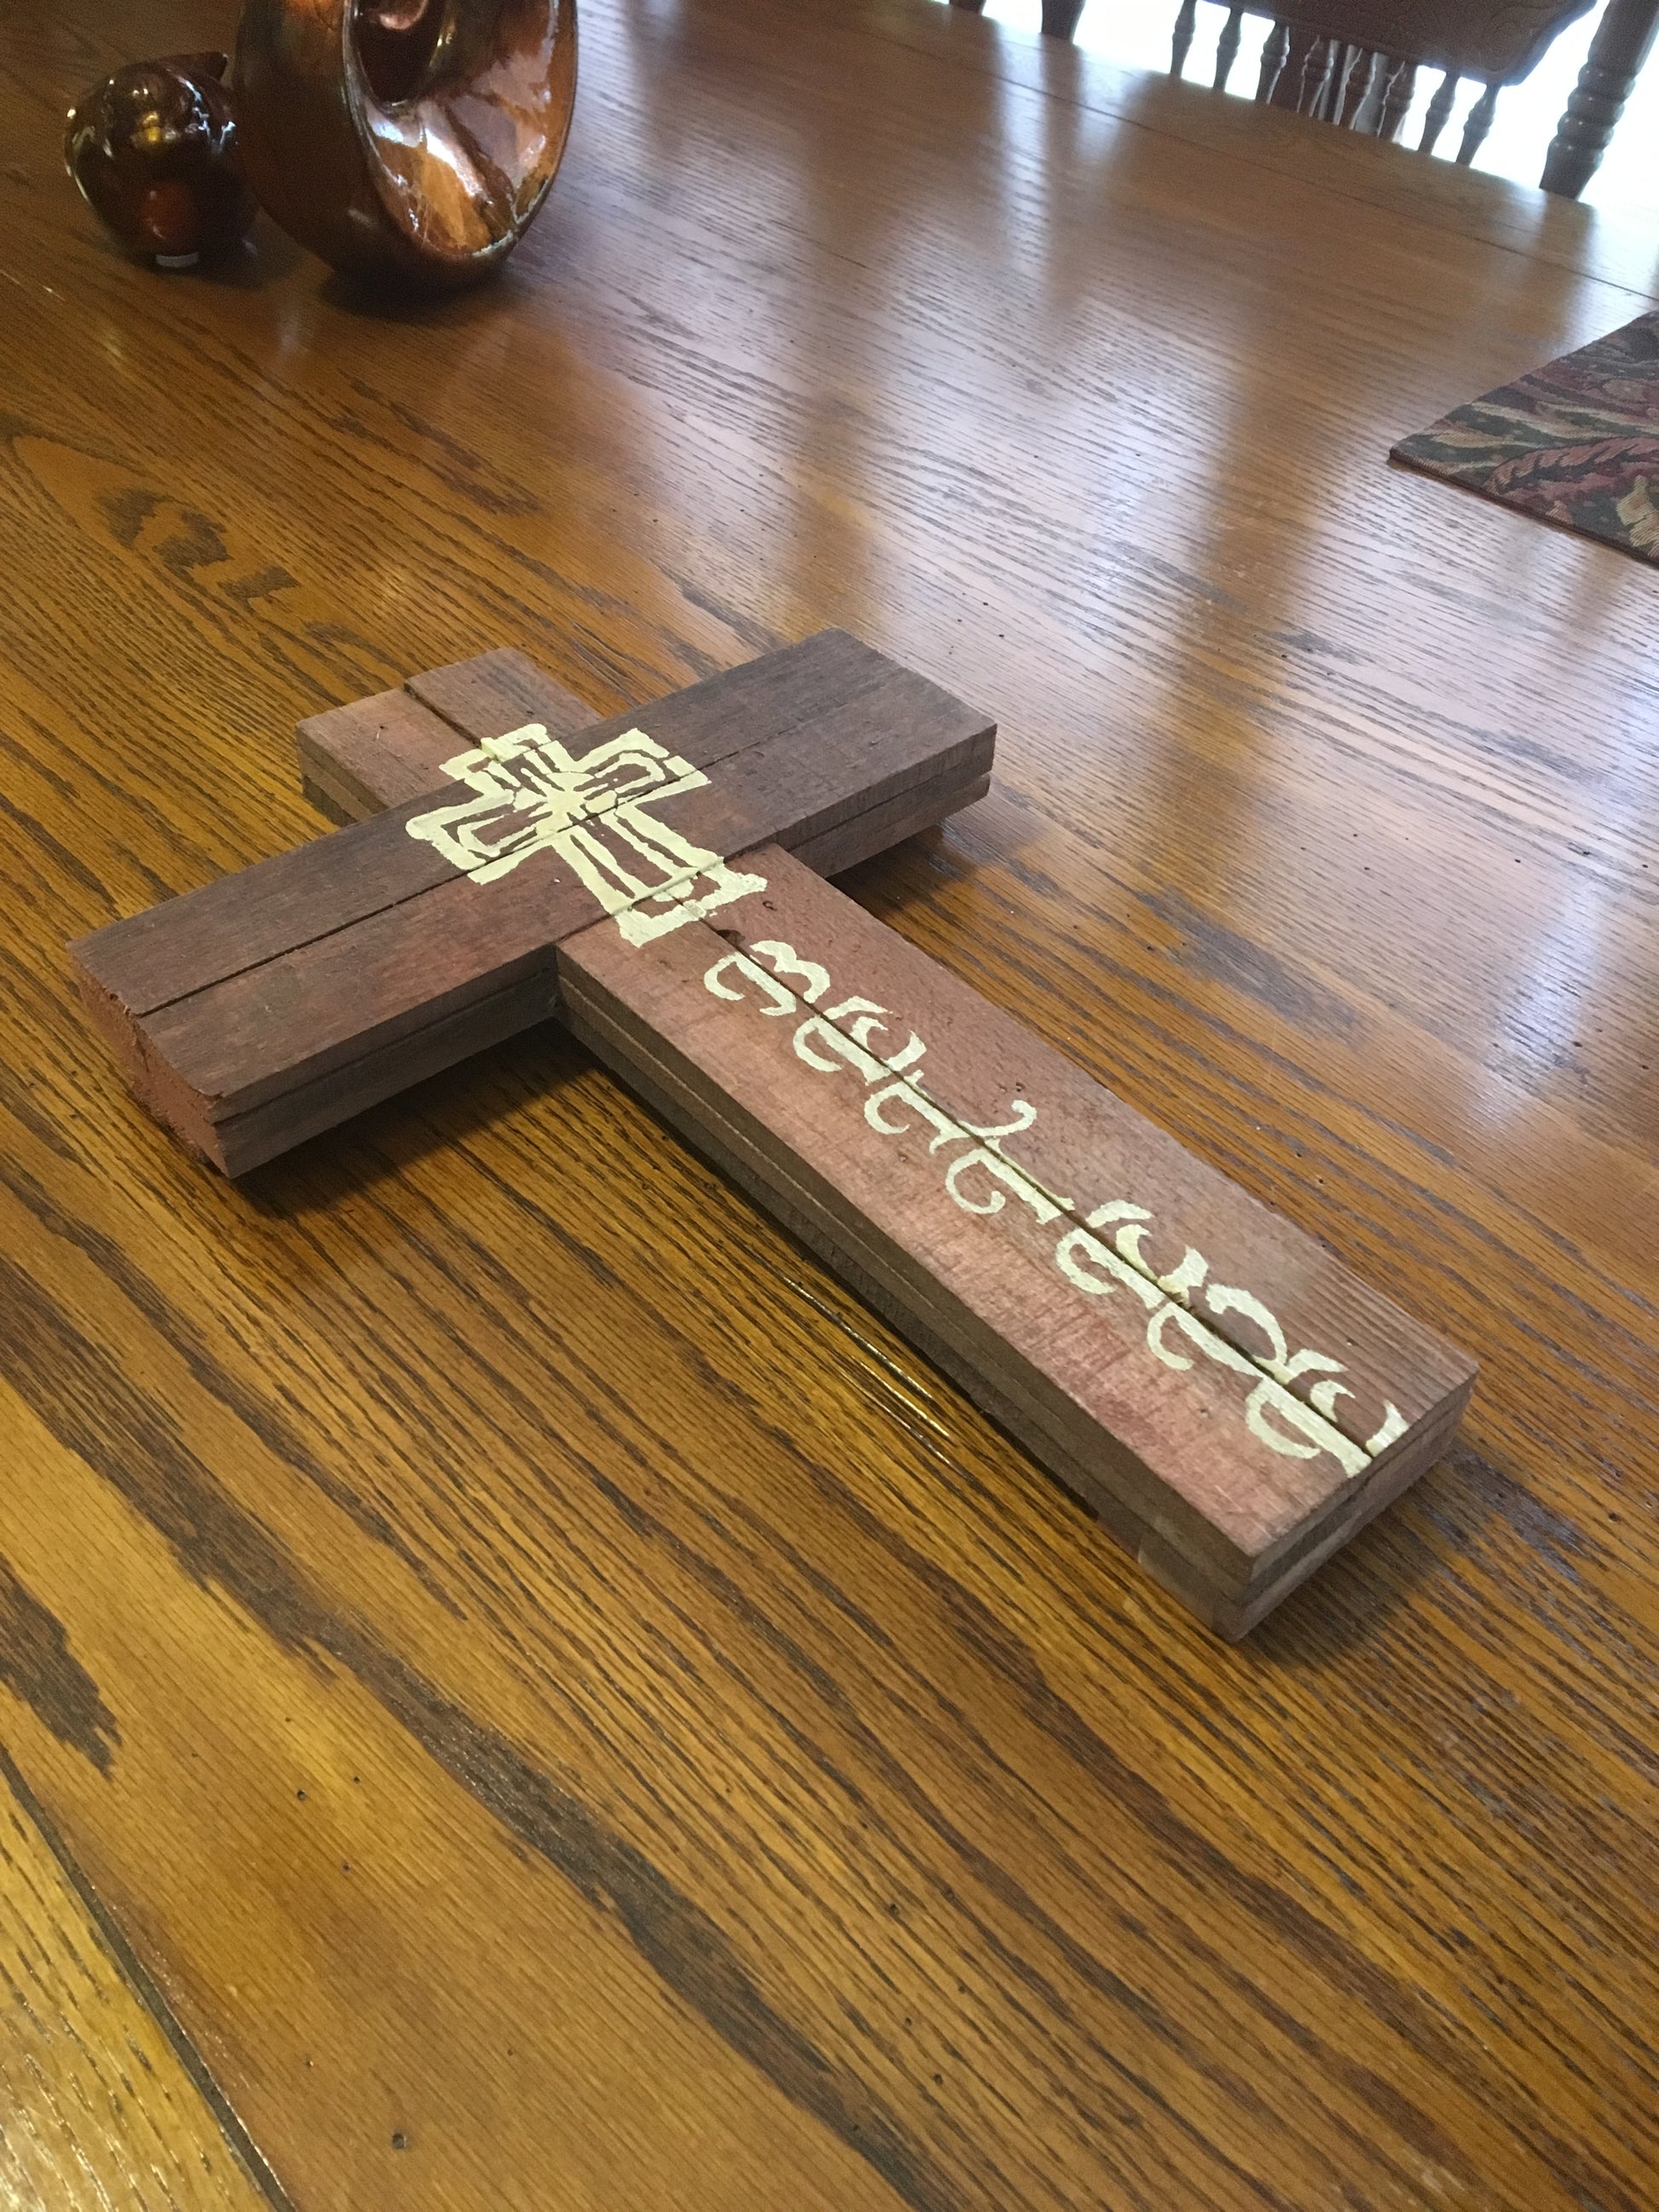 Pretty Believe wood sign on wood grain table